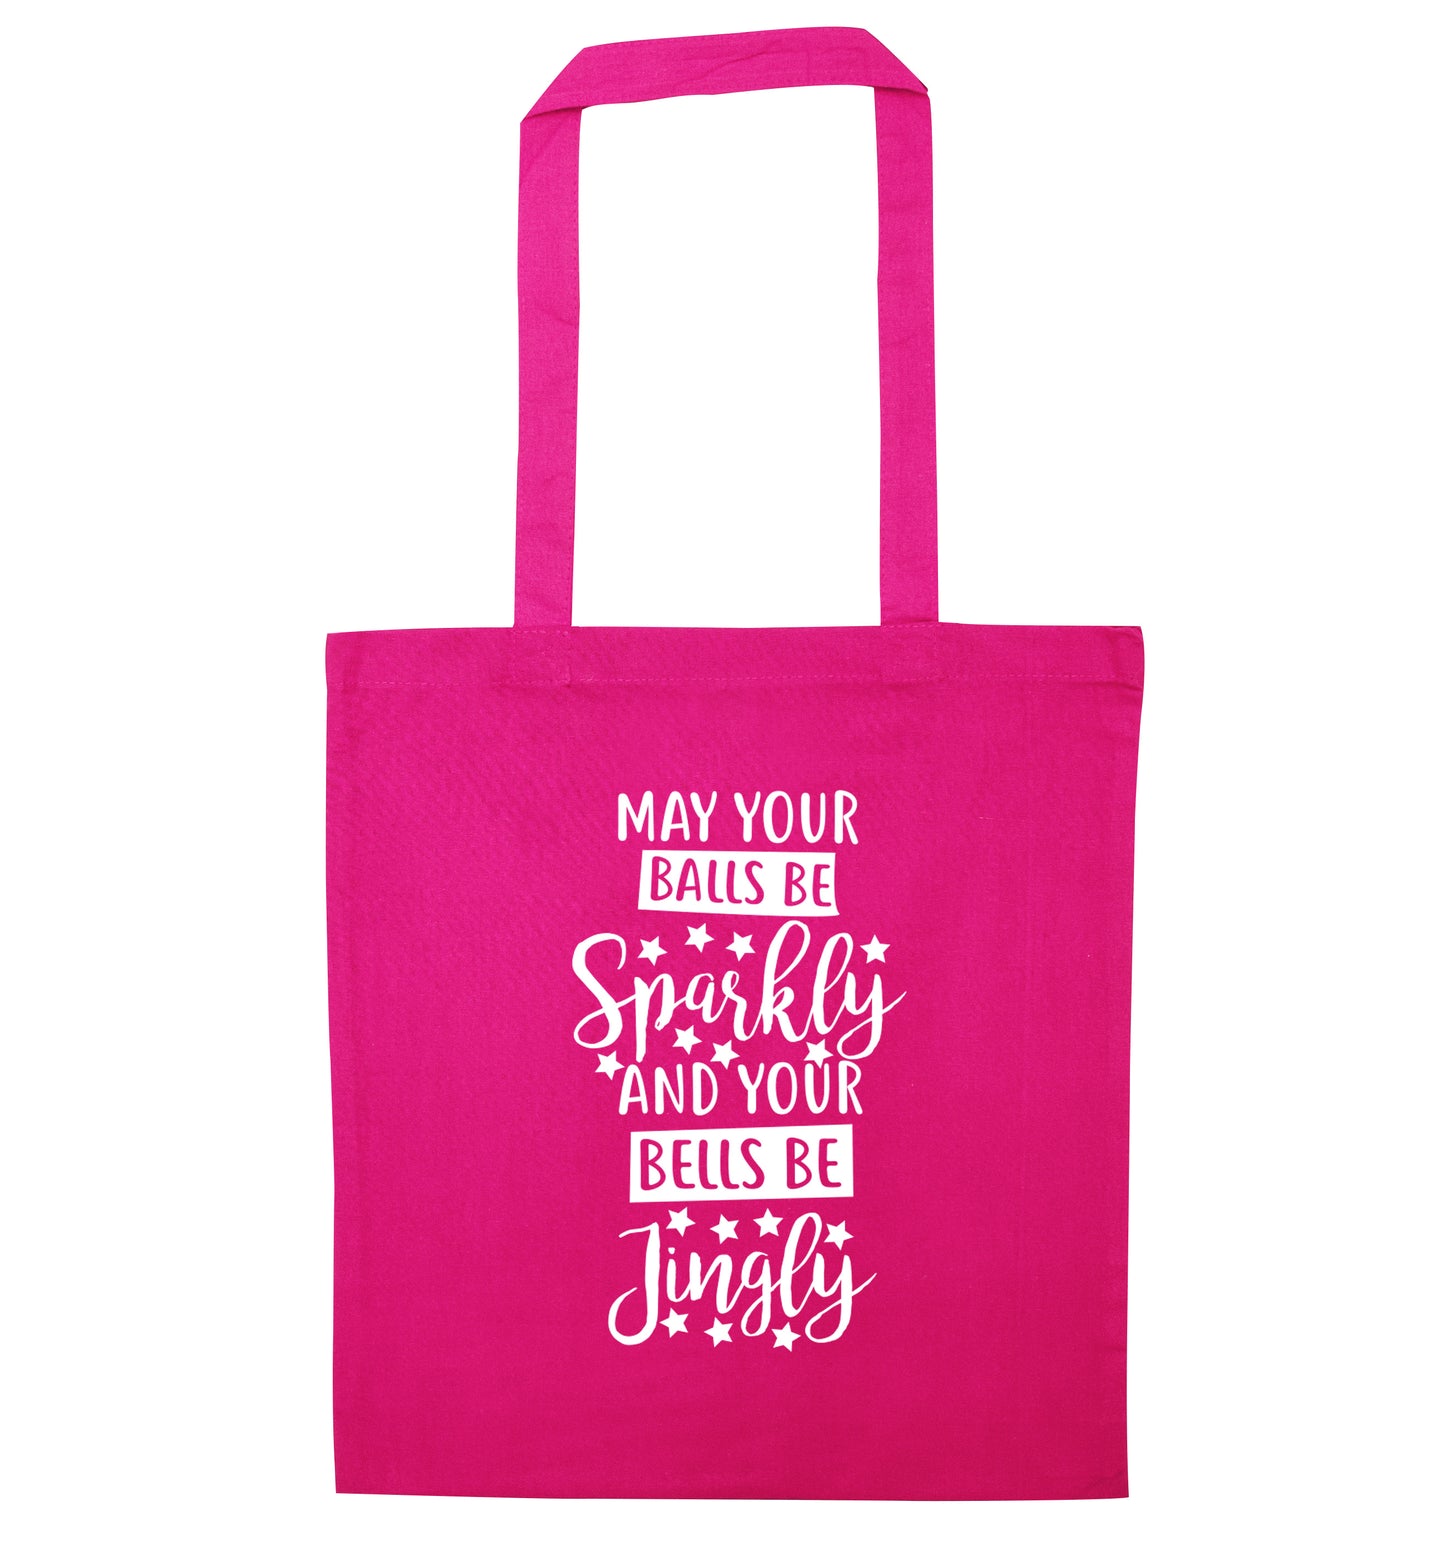 May your balls be sparkly and your bells be jingly pink tote bag